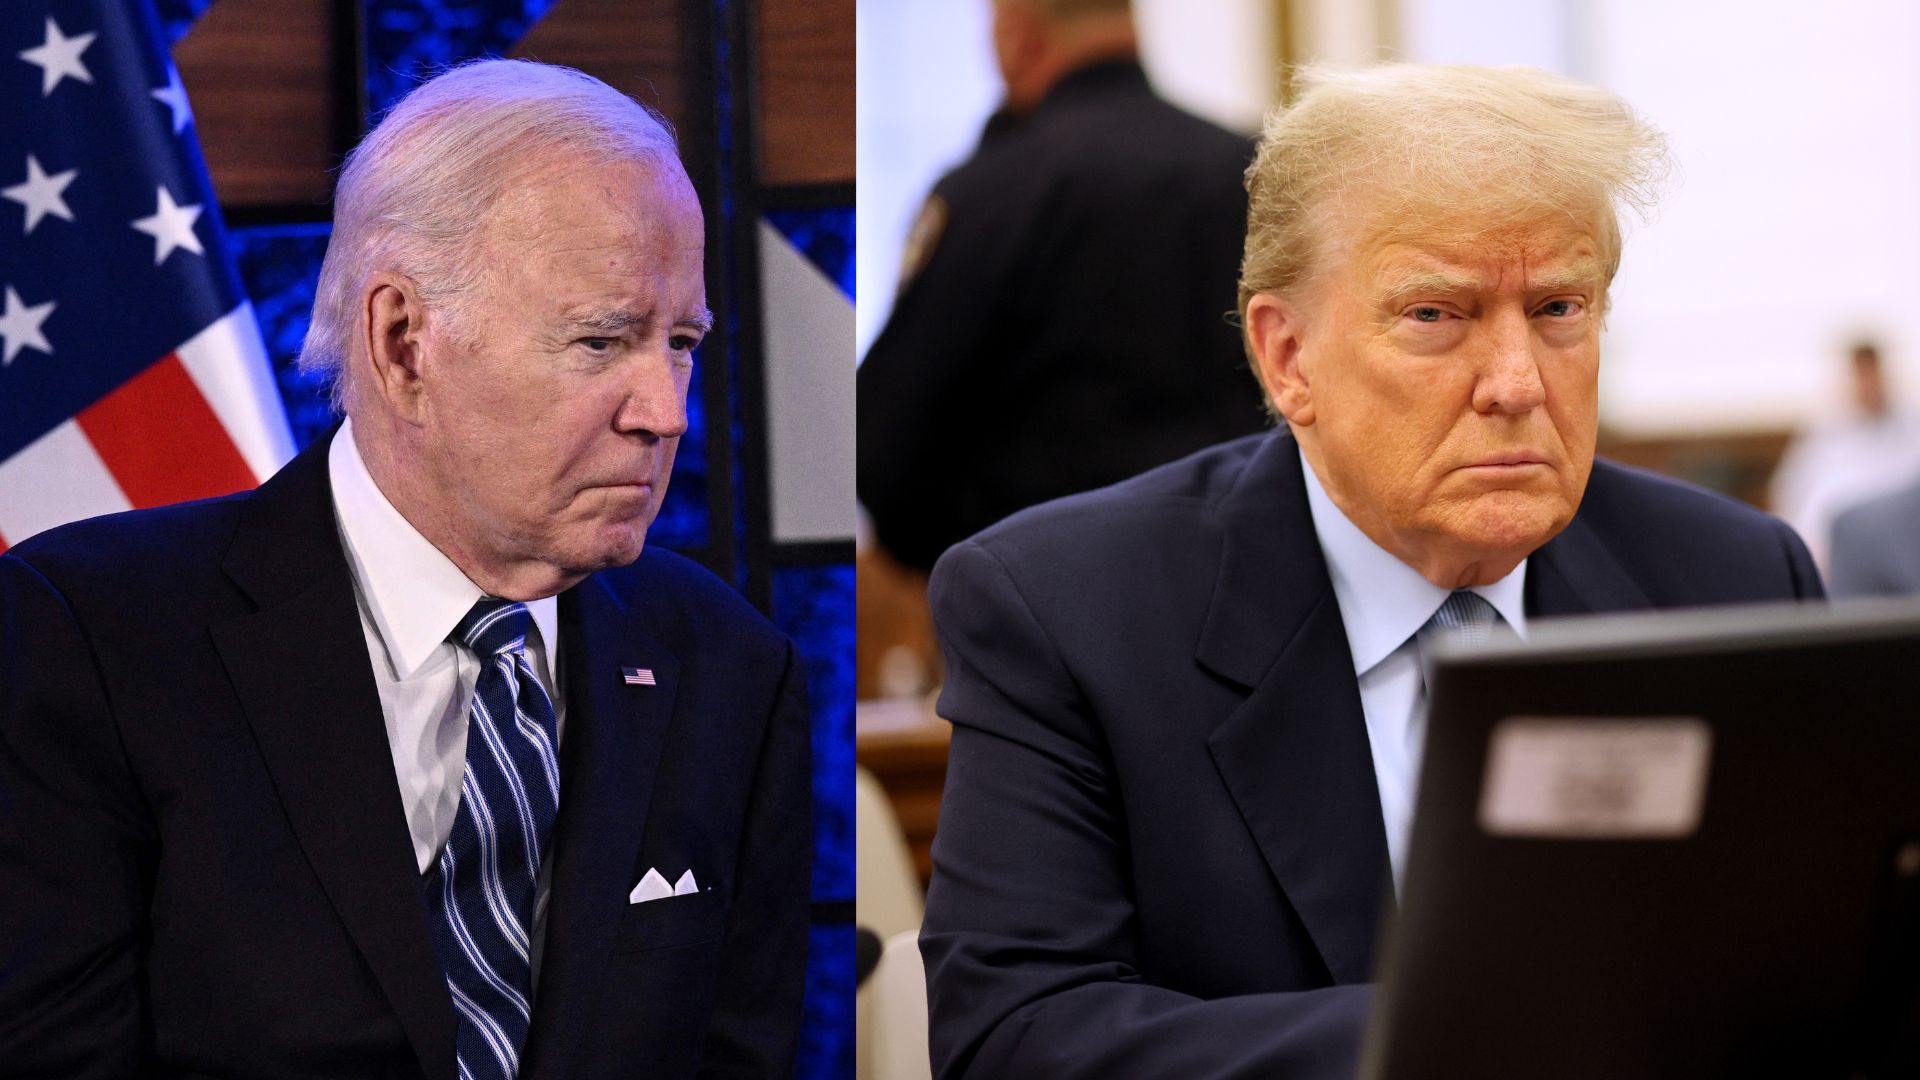 Trump, others criticize Biden for funding Palestinians with US tax dollars, calling it “totally inappropriate.”